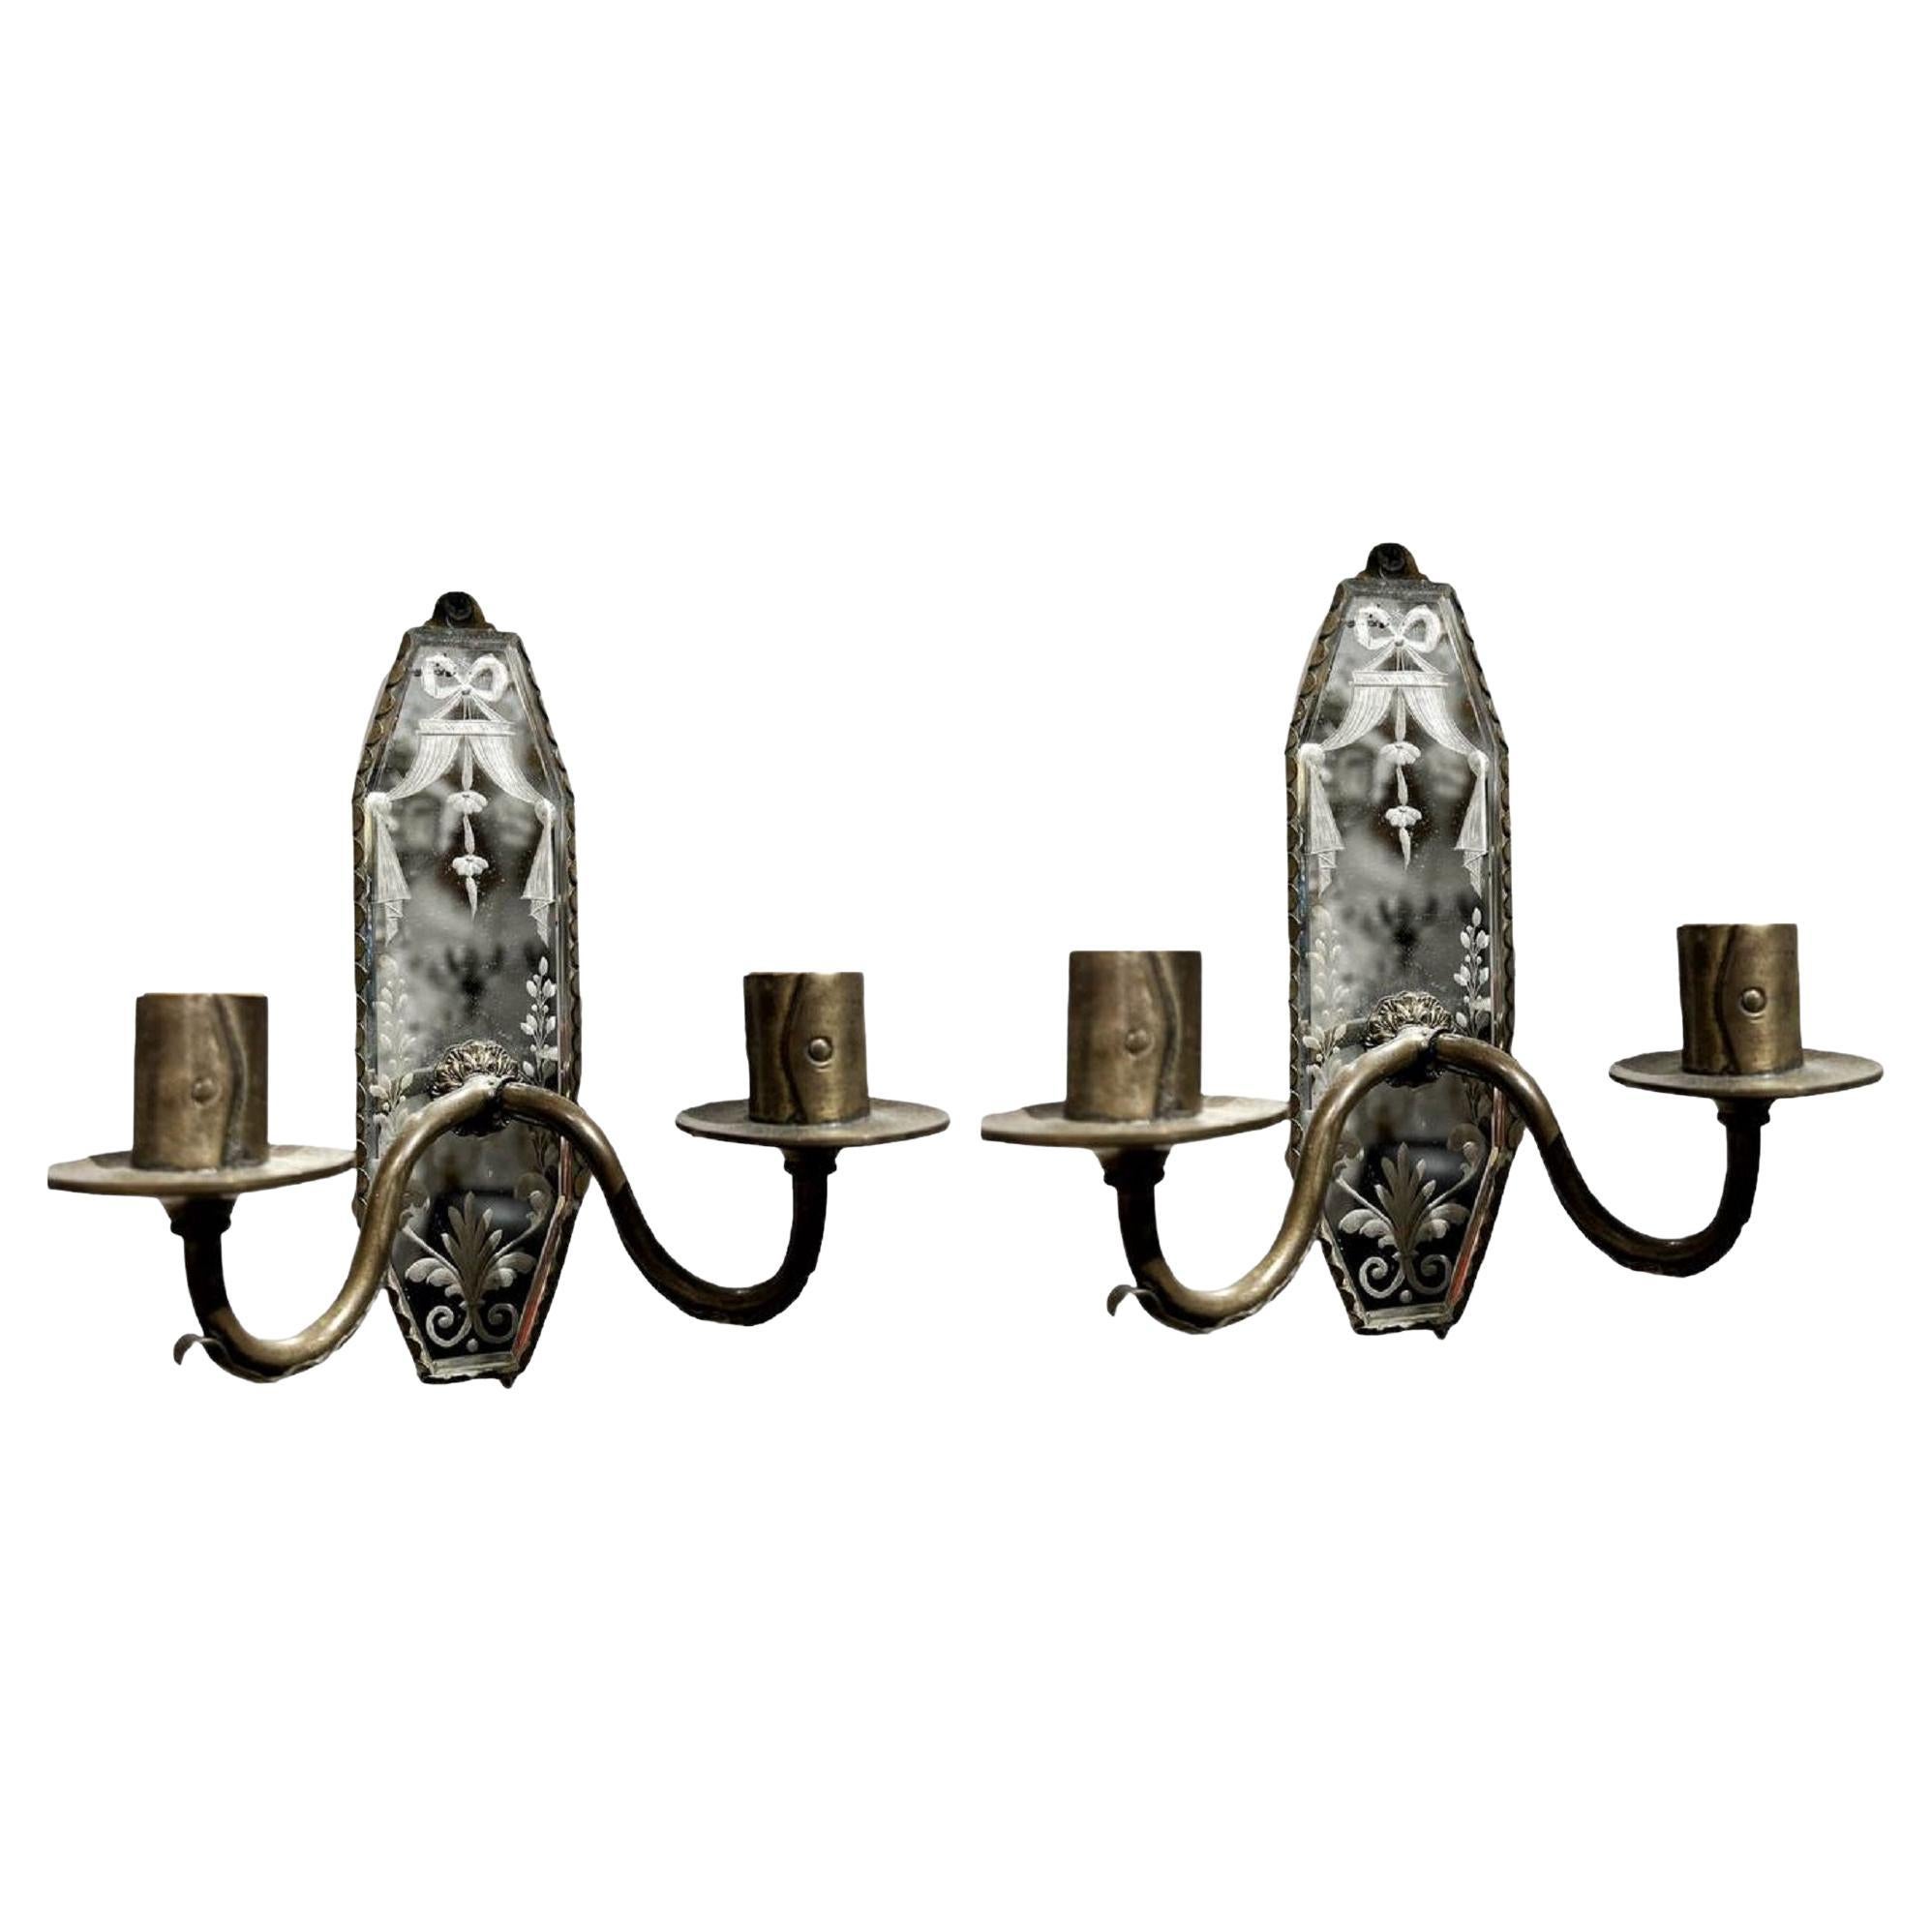 1920’s Small French Etched Mirrored Sconces